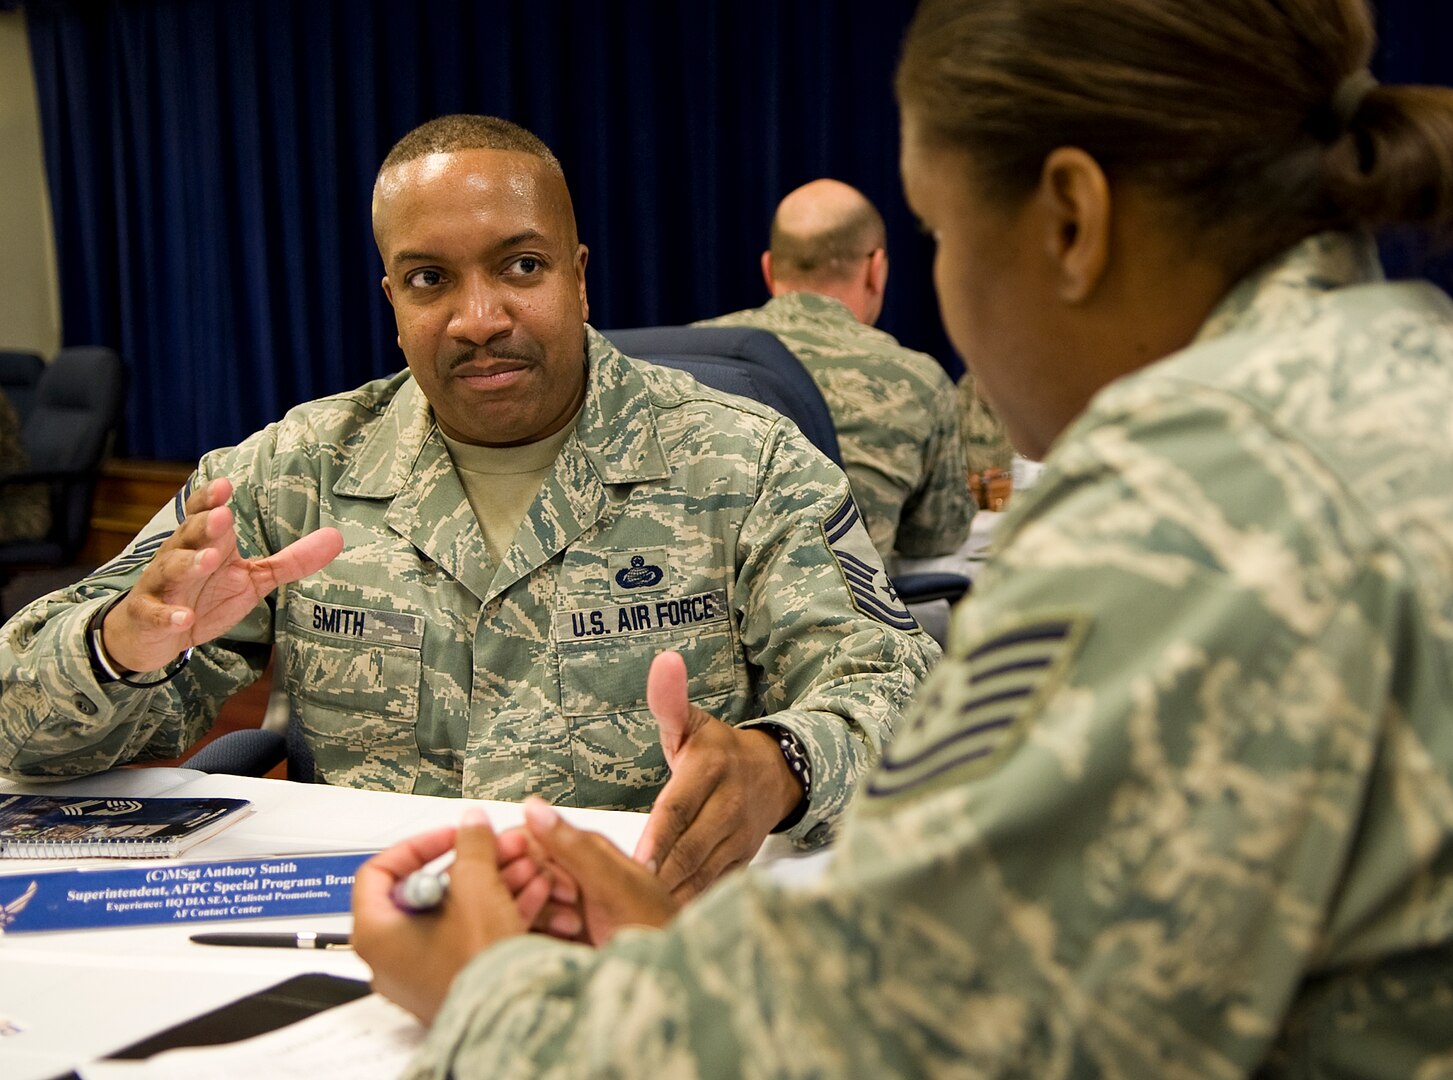 Tech Sgt. Jamie Dukes, Air Force Personnel Center Retirement Total Force Service Center-San Antonio NCOIC, discusses the future direction of the Air Force with Senior Master Sgt.  Anthony Smith, AFPC Superintendent Special Programs Branch, at the speed mentoring seminar hosted by the Rising 5/6  April 25 at Joint Base San Antonio-Randolph. (U.S. Air Force photo by Benjamin Faske)